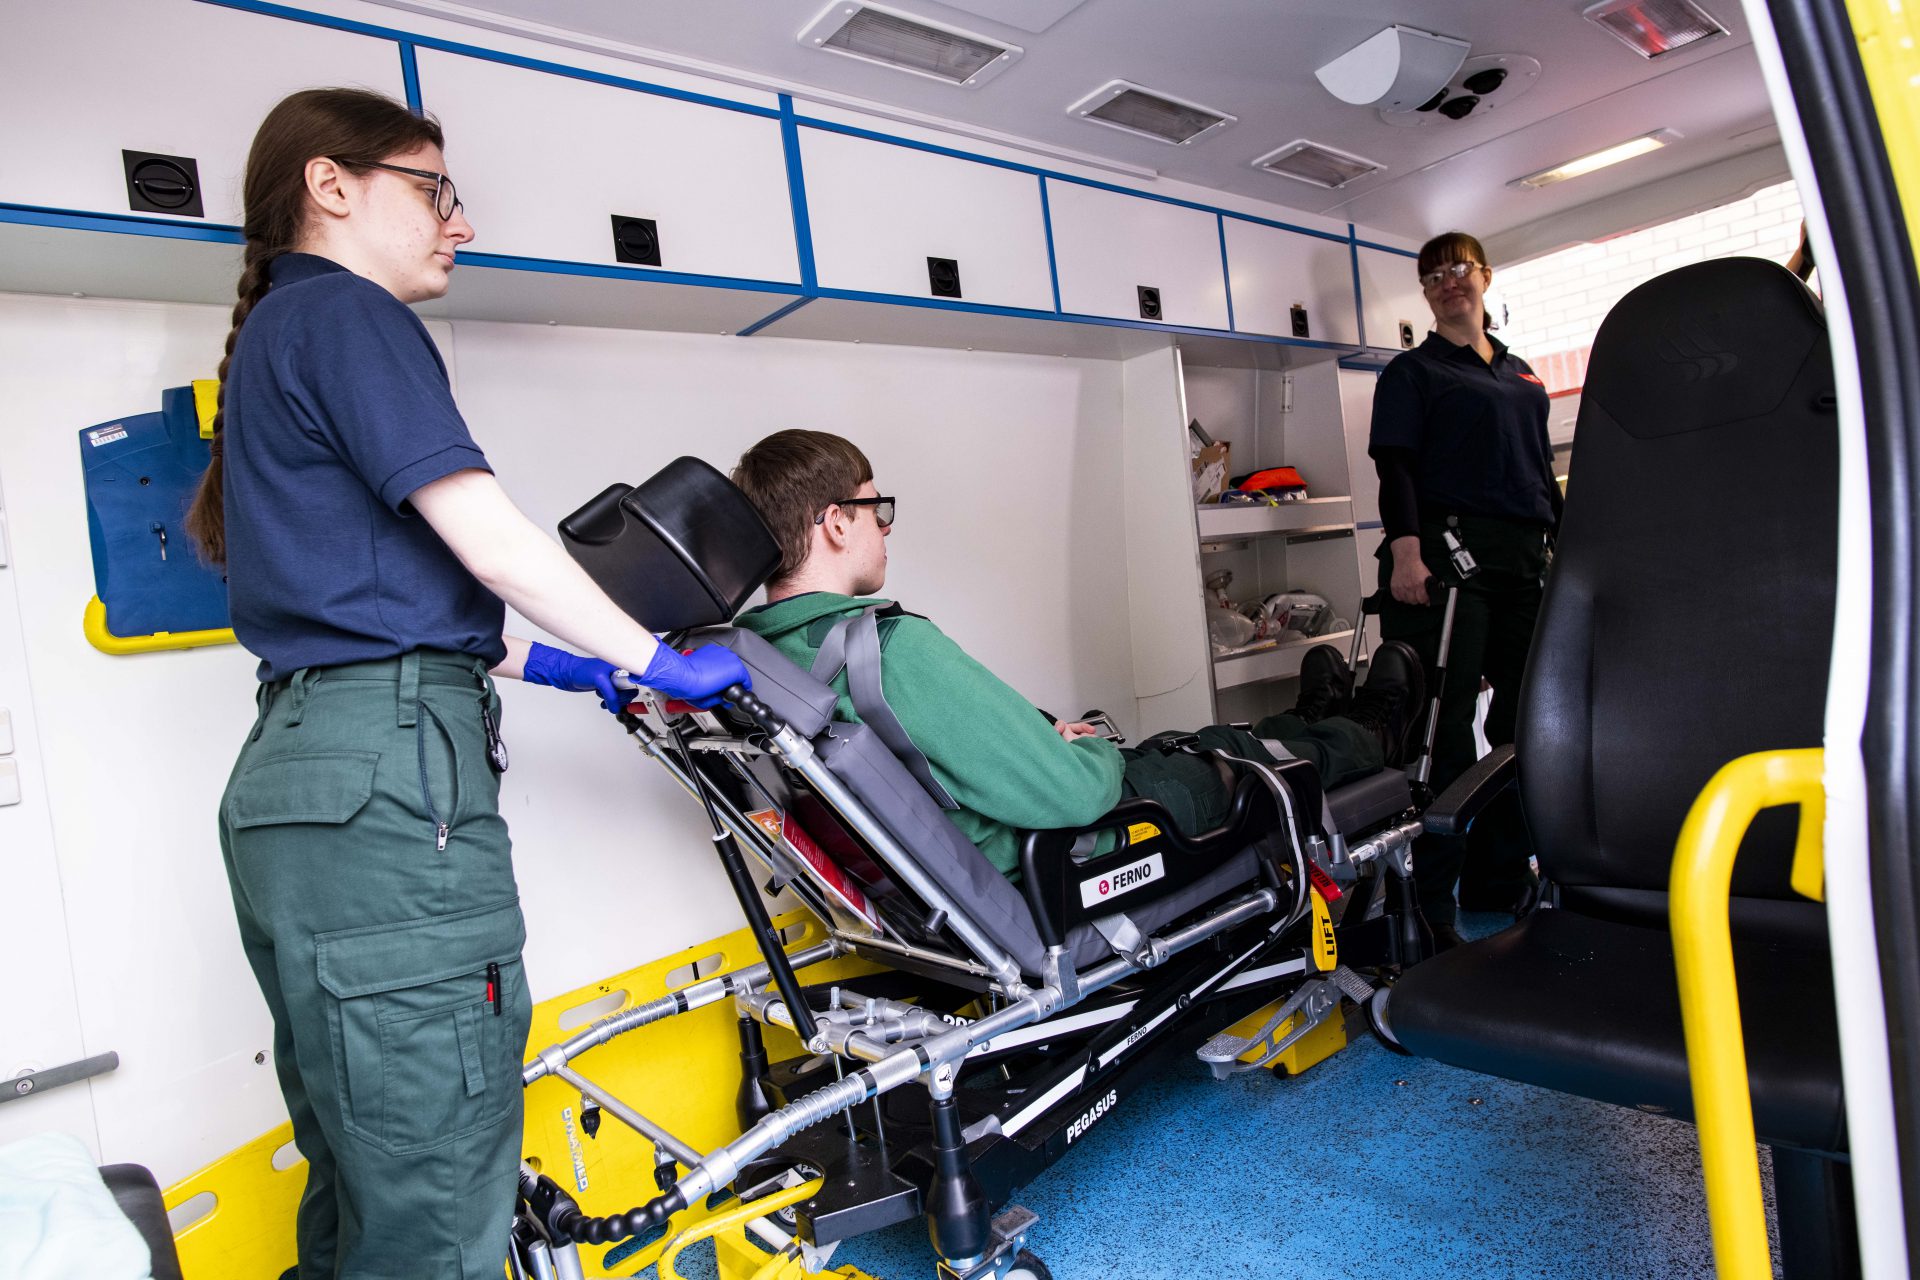 A student helping to remove a patient (played by an actor) from an ambulance on a trolley.